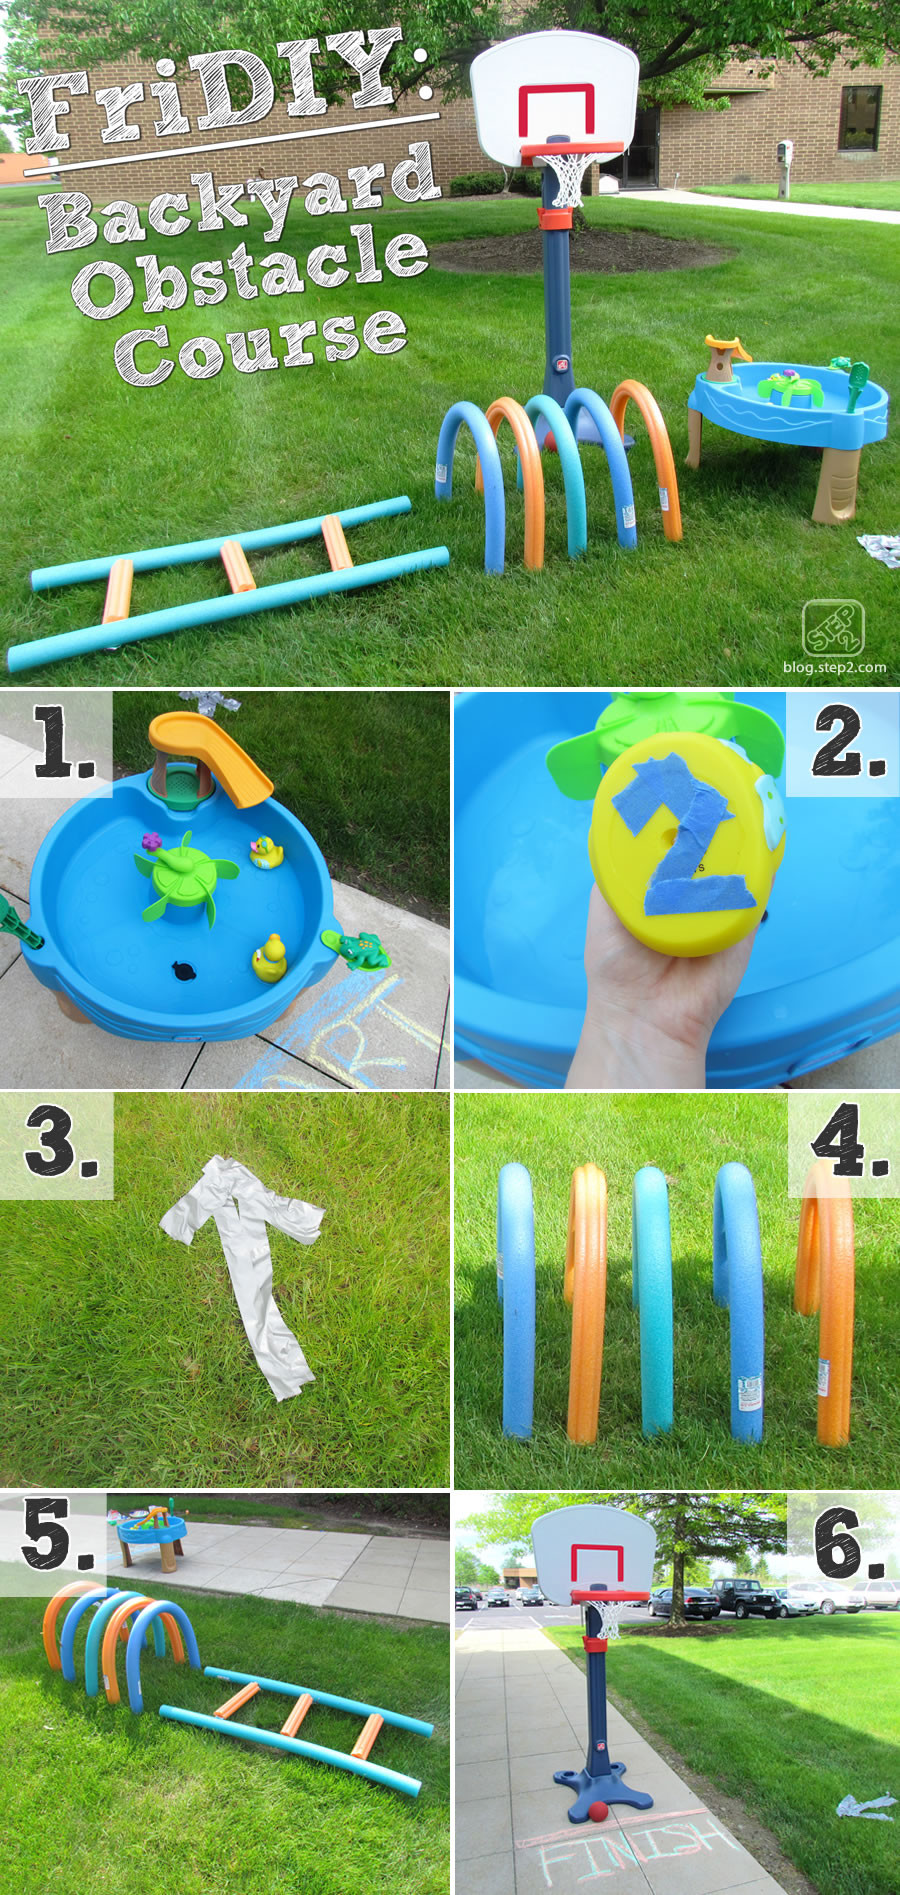 Diy Kids Obstacle Course
 Backyard Fun Archives Step2 Blog